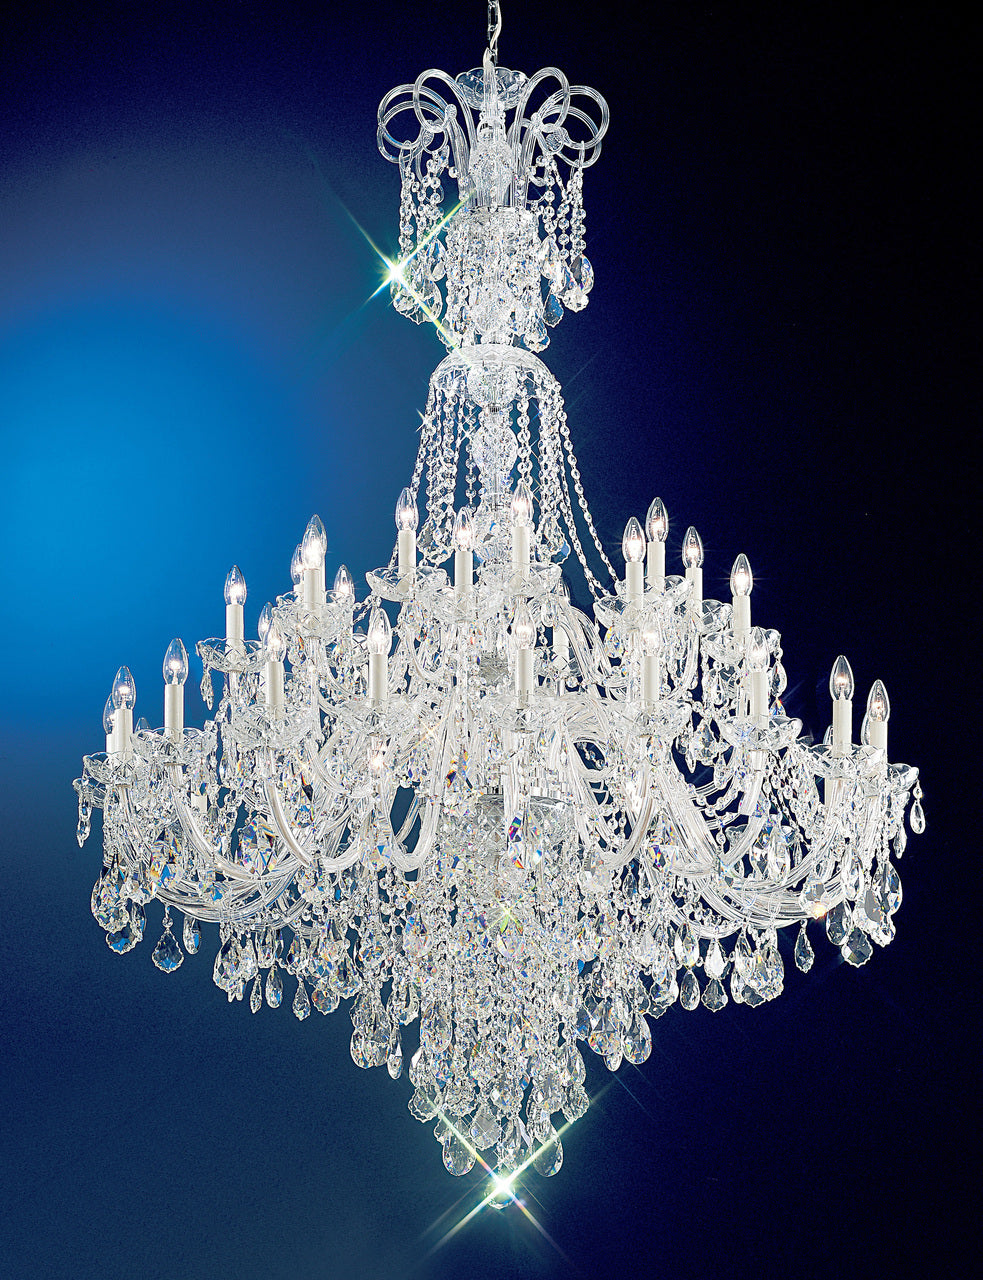 Classic Lighting 8266 CH C Bohemia Crystal/Glass Chandelier in Chrome (Imported from Italy)